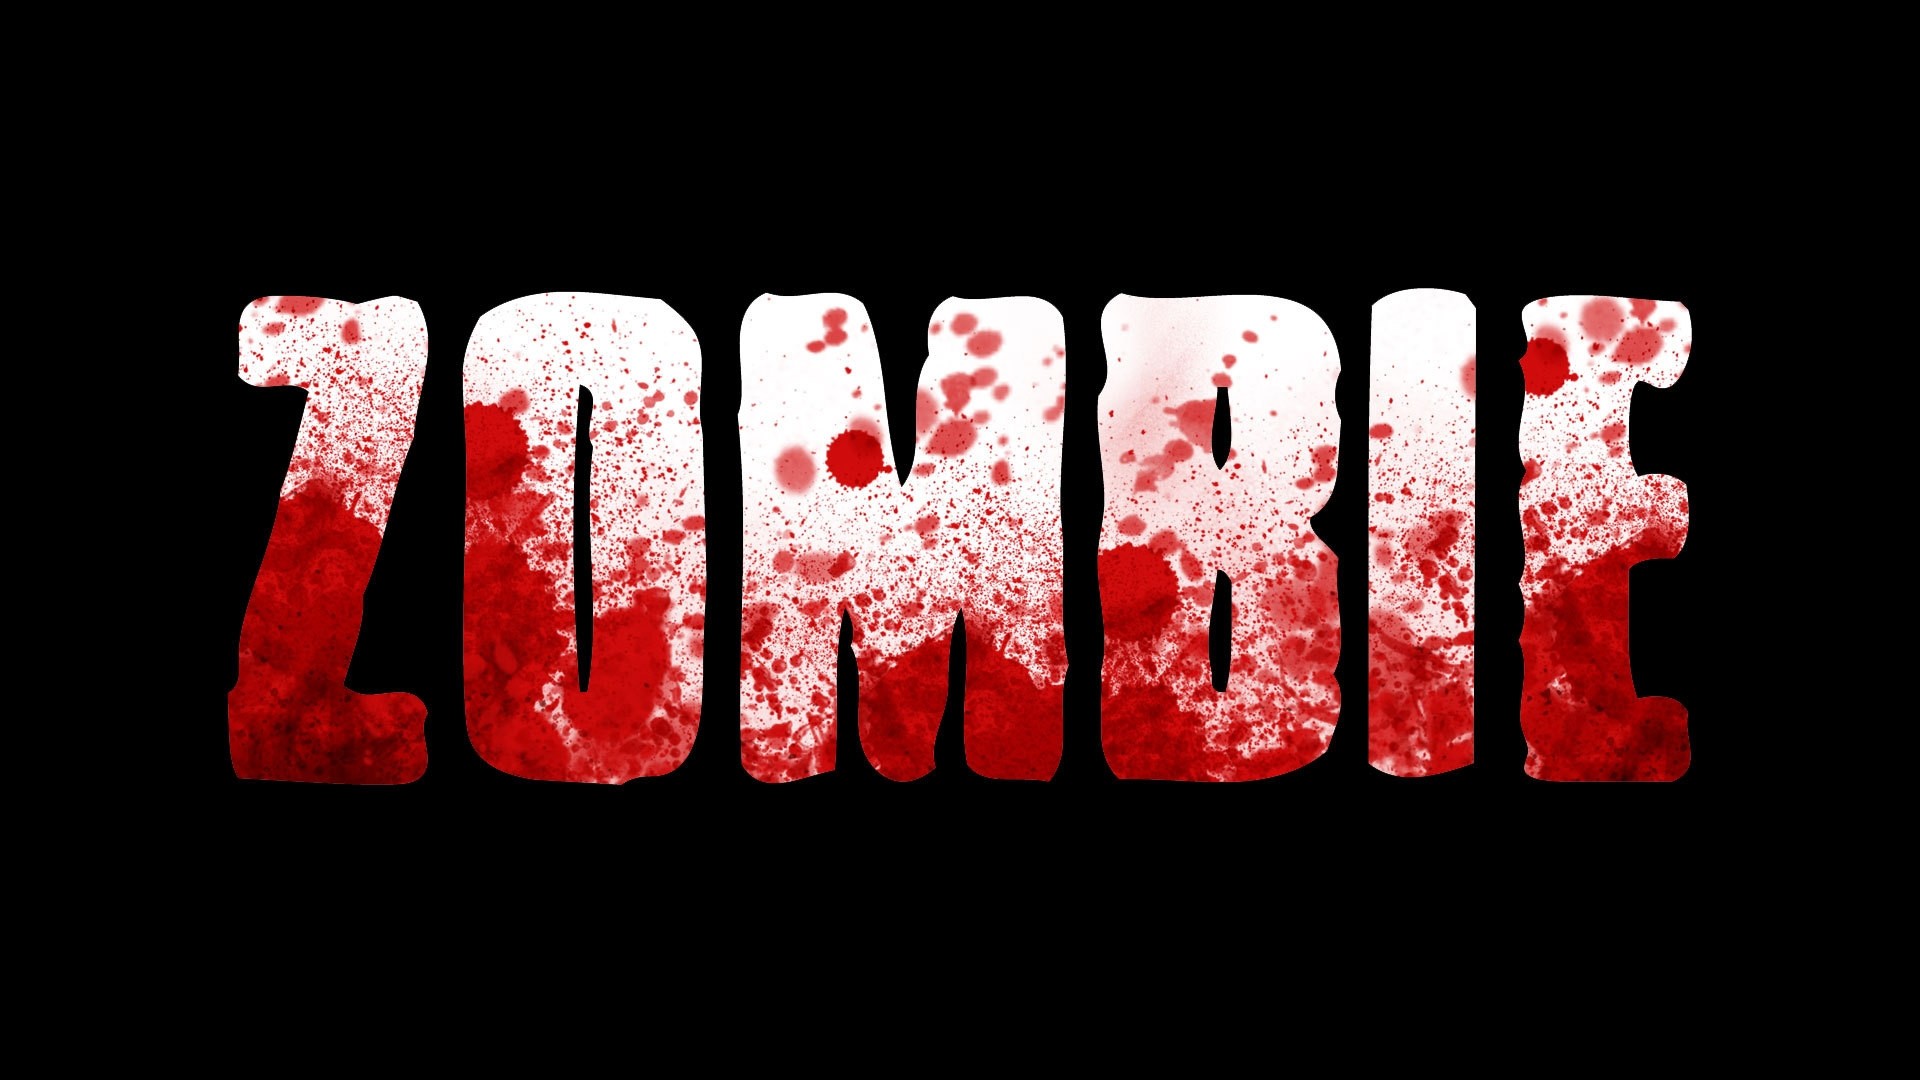 1920x1080 Image result for zombies follow wallpaper | followerZ | Pinterest | Zombie  wallpaper, Wallpaper and Wallpaper backgrounds